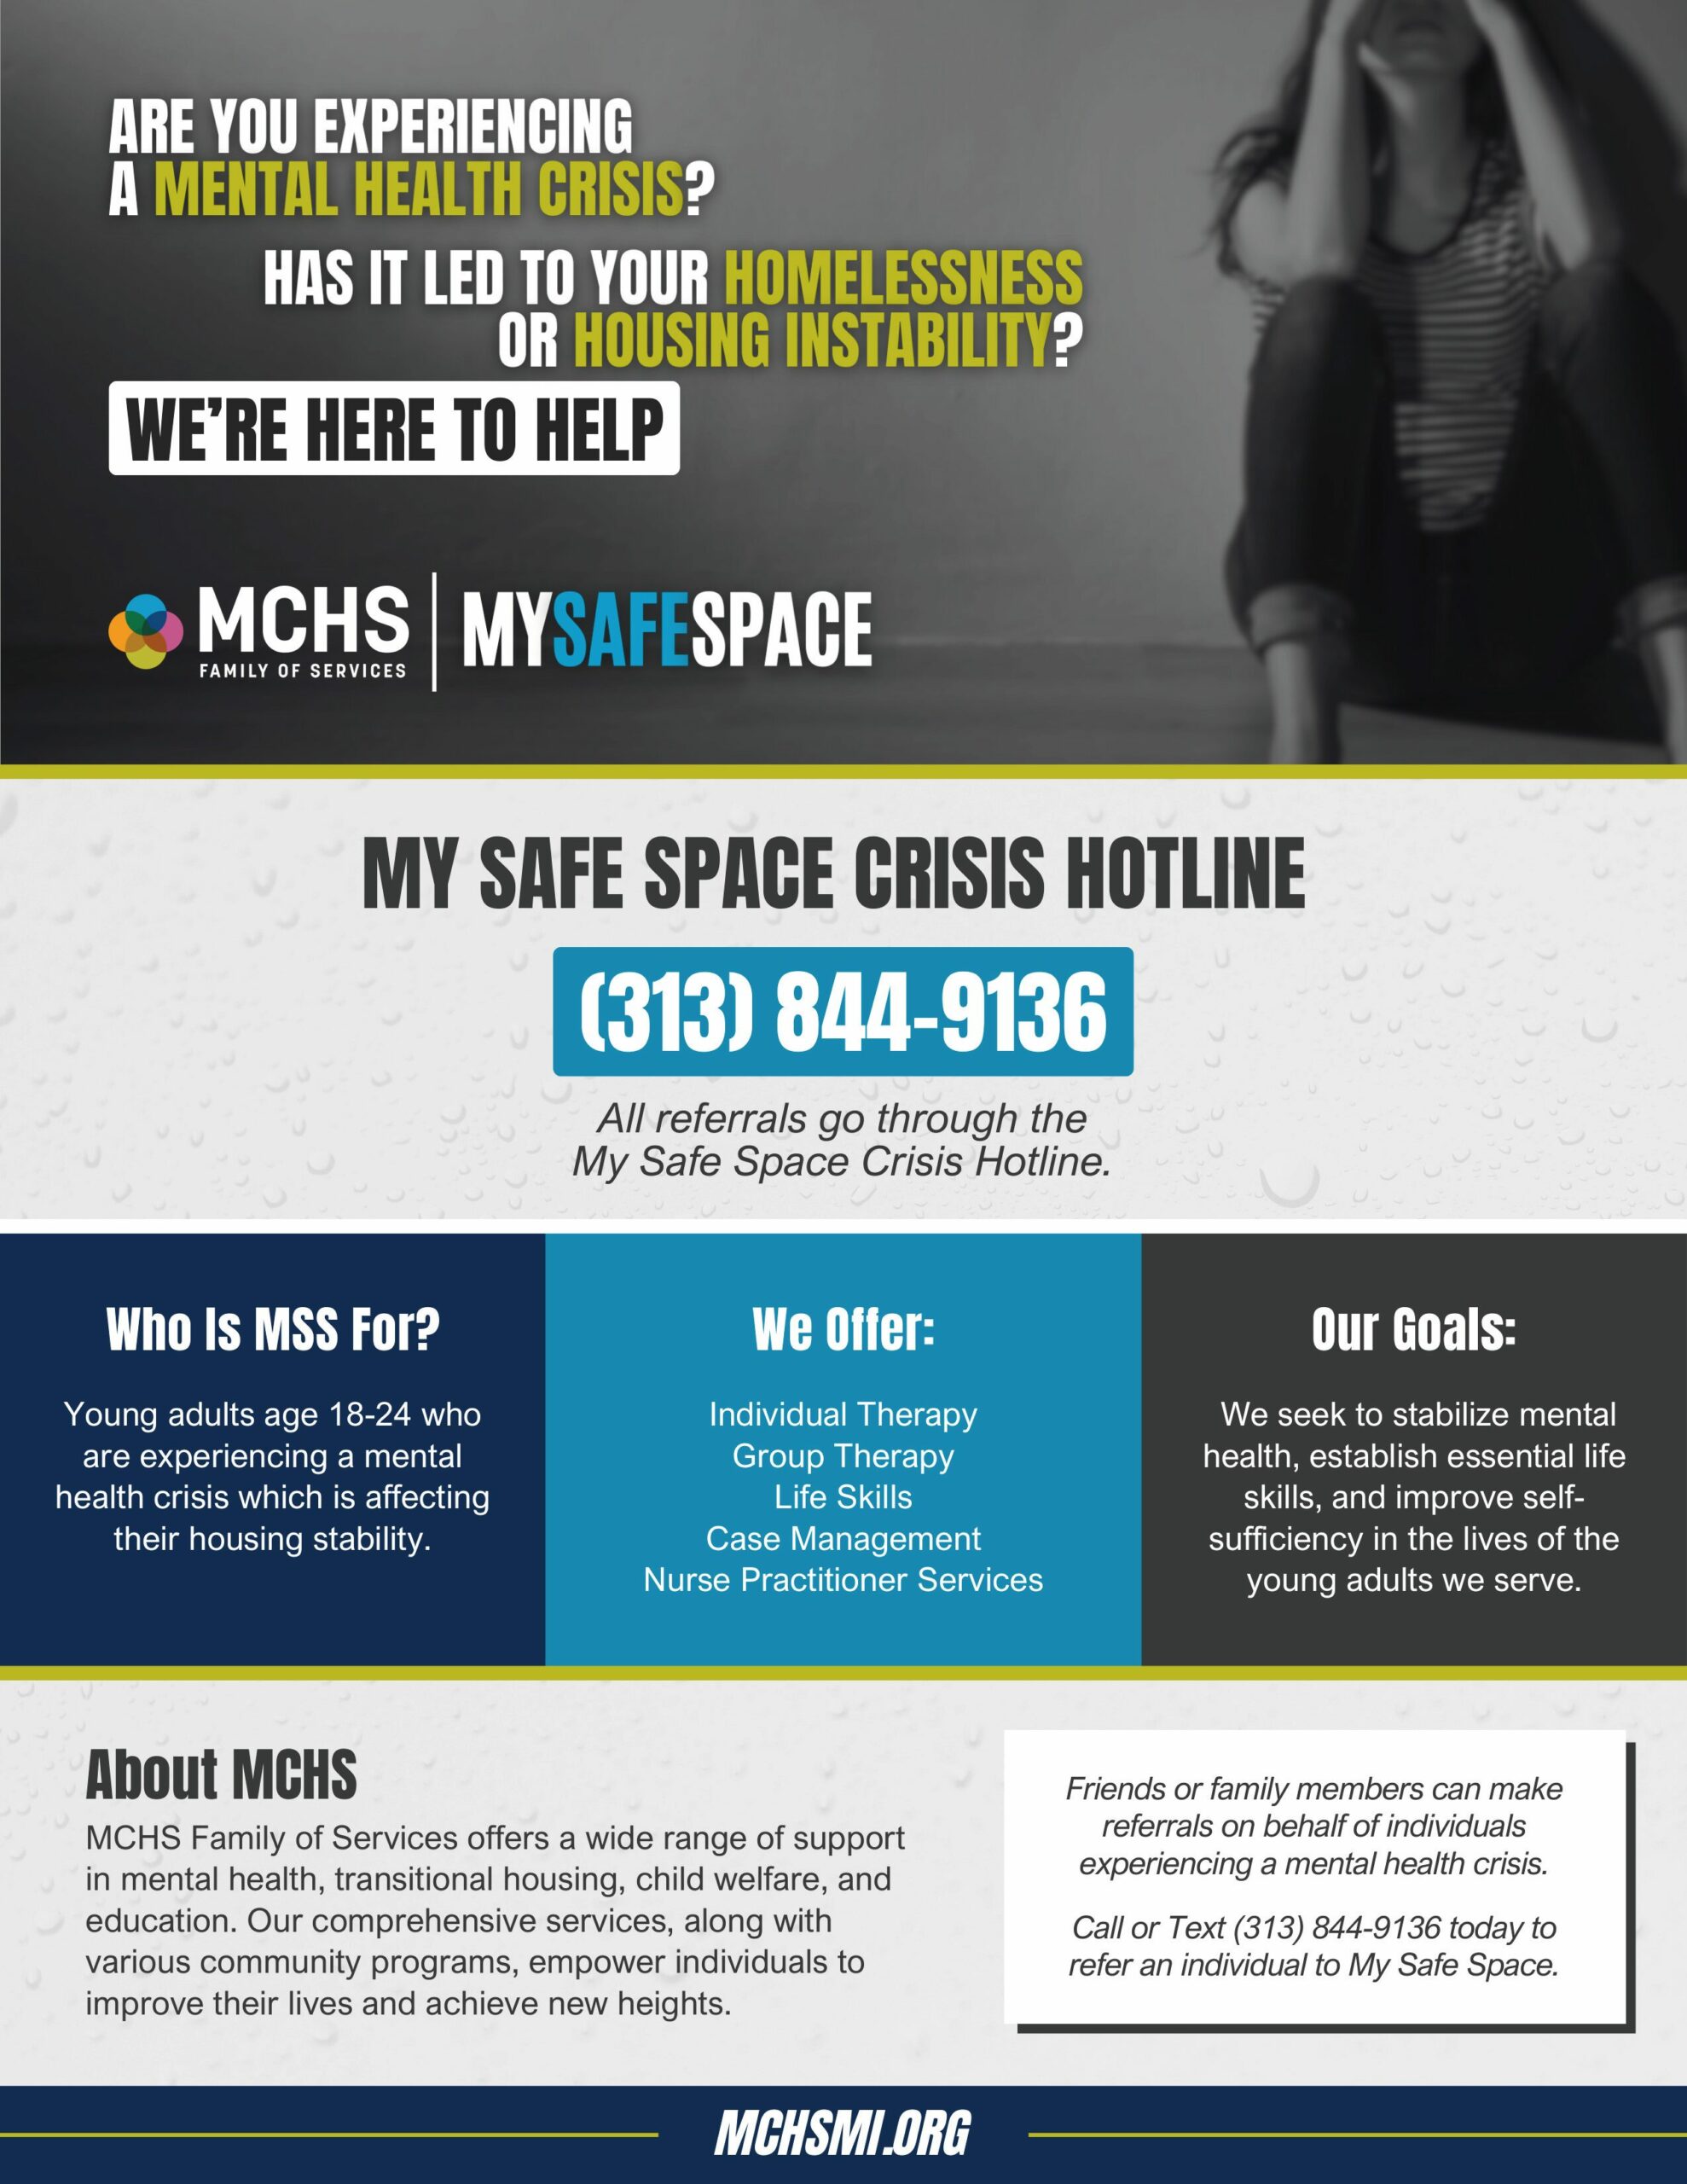 My Safe Space: Youth mental health crisis hotline flyer from MCHS